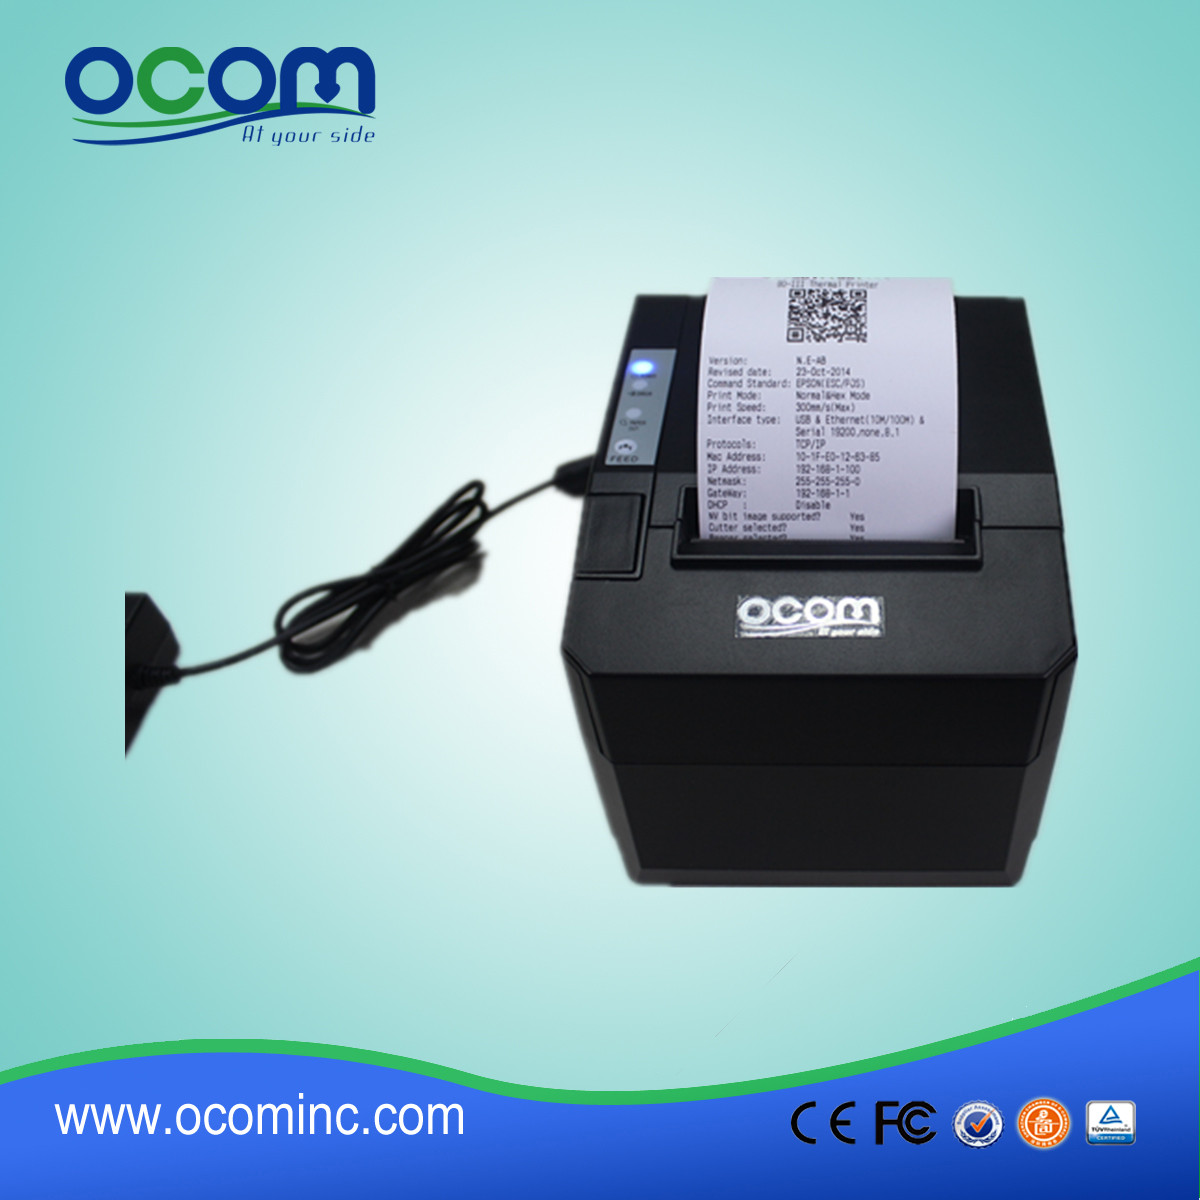 Low-Priced 80mm Android USB Thermal Printer OCPP-88A-U